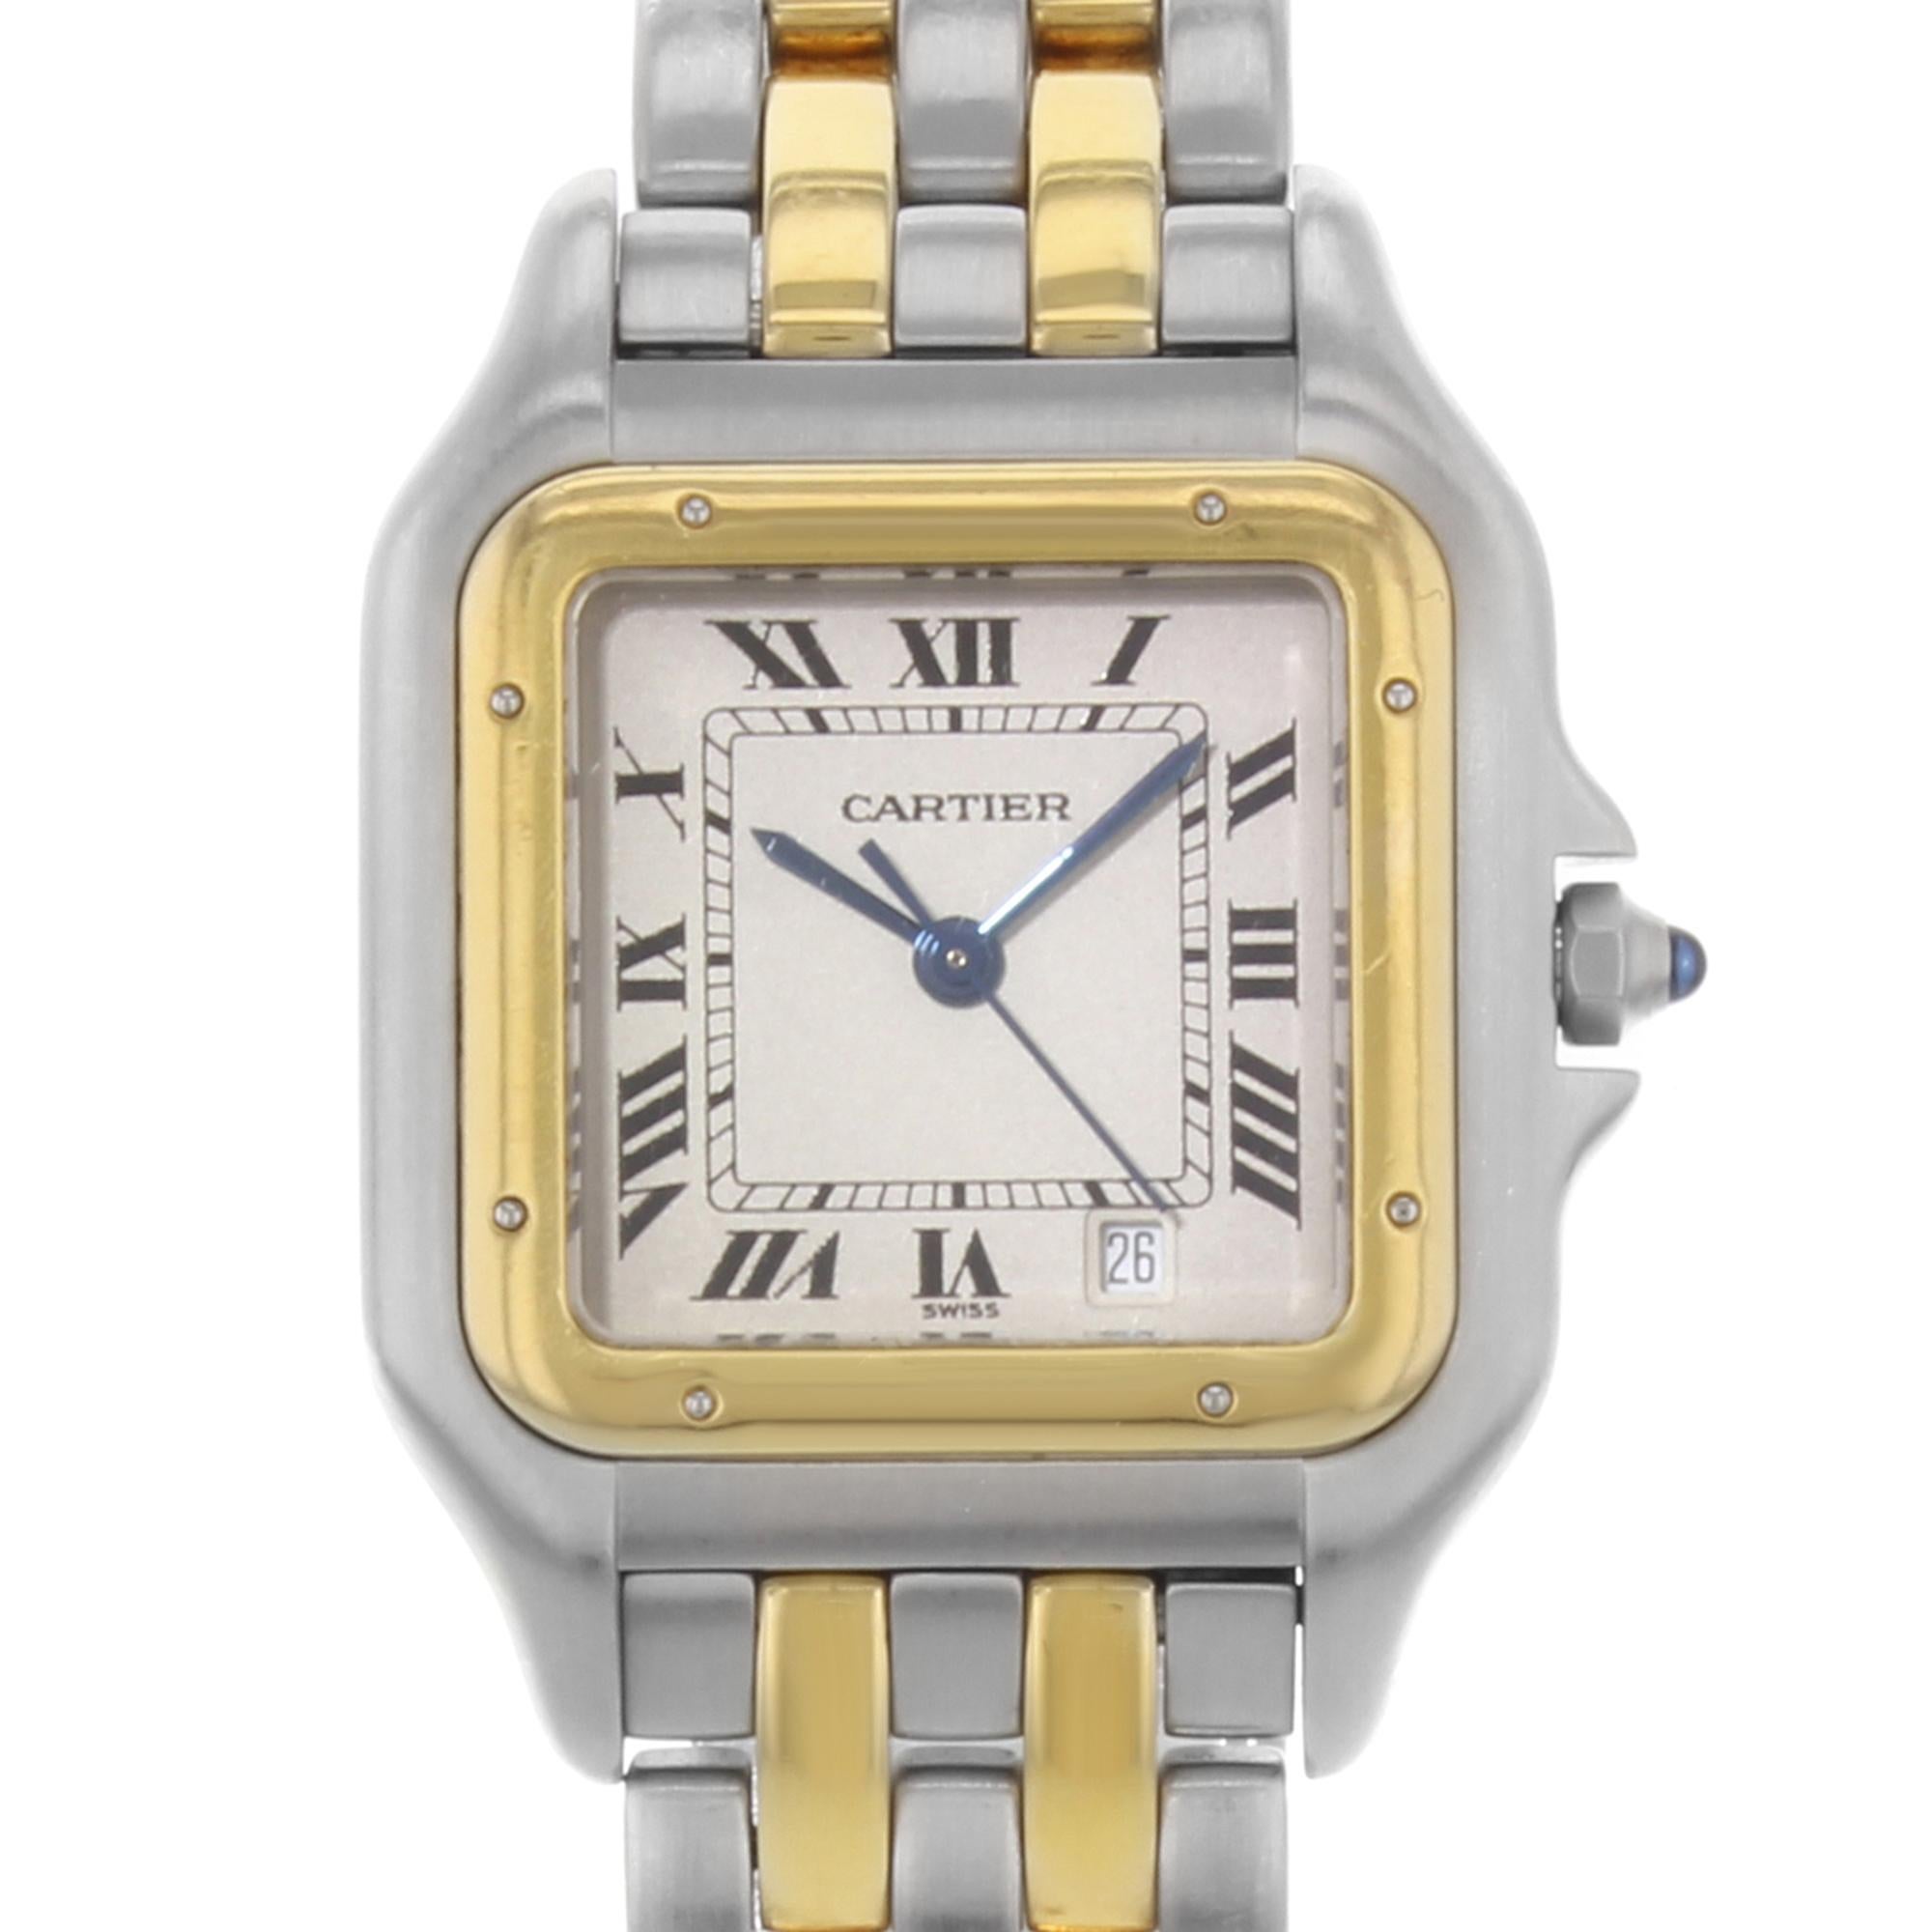 This pre-owned Cartier Panthere  ref. 1100 is a beautiful Ladie's timepiece that is powered by quartz (battery) movement which is cased in a stainless steel case. It has a square shape face, date indicator dial and has hand roman numerals style